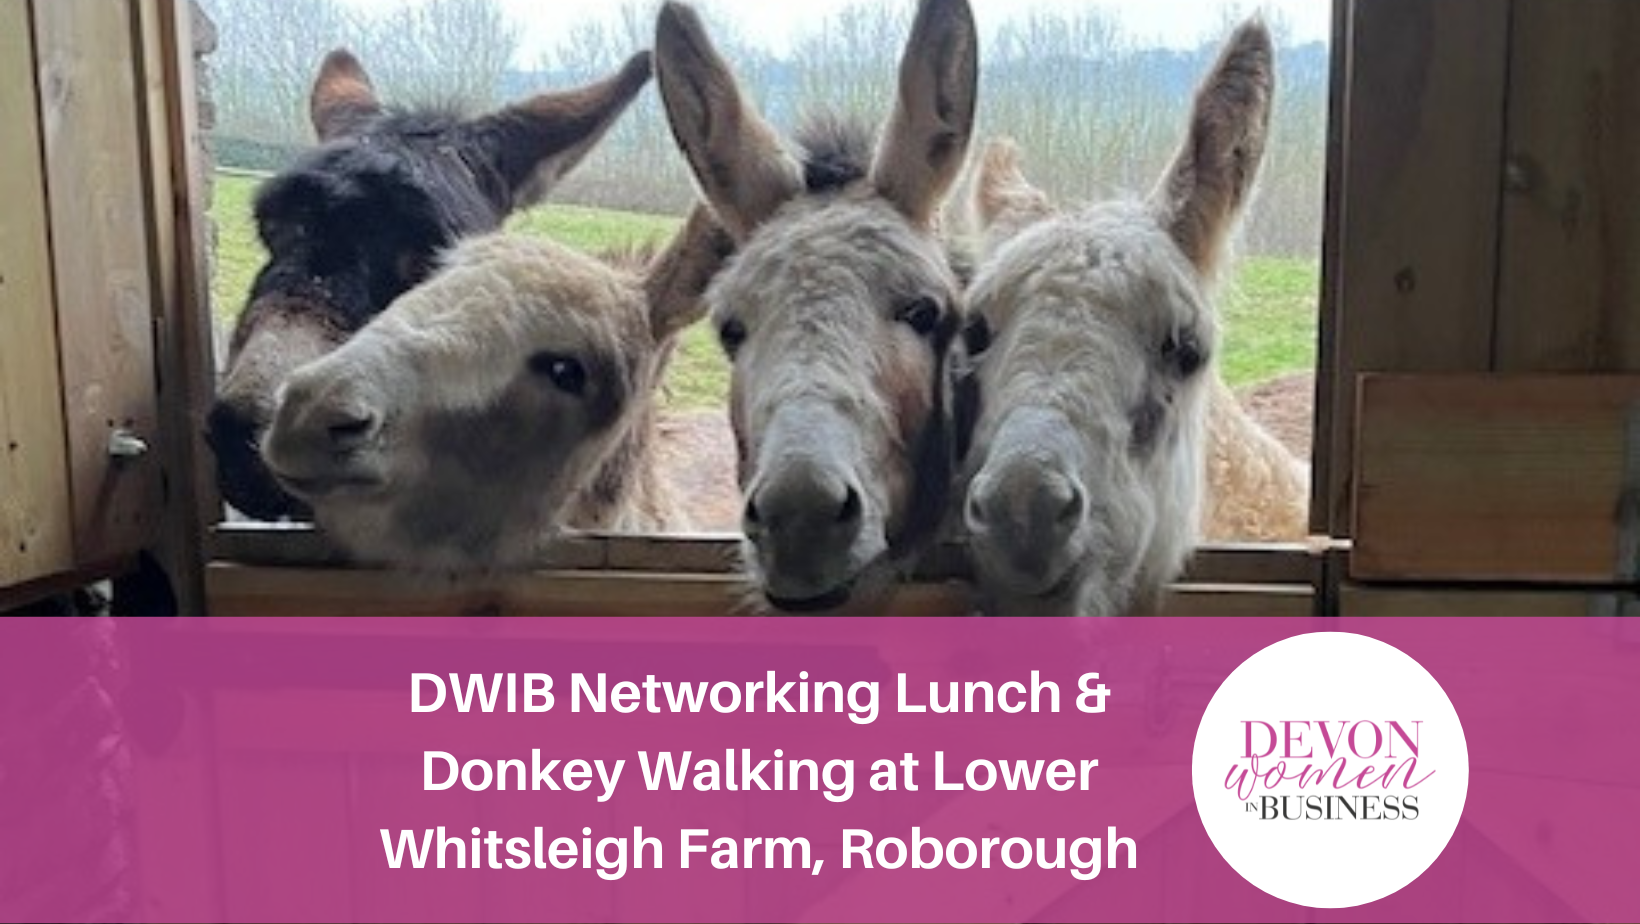 Four donkeys looking over a stable door. Text: DWIB Networking Lunch and Donkey Walking at Lower Whotsleigh Farm, Roborough. Logo: Devon Women in Business